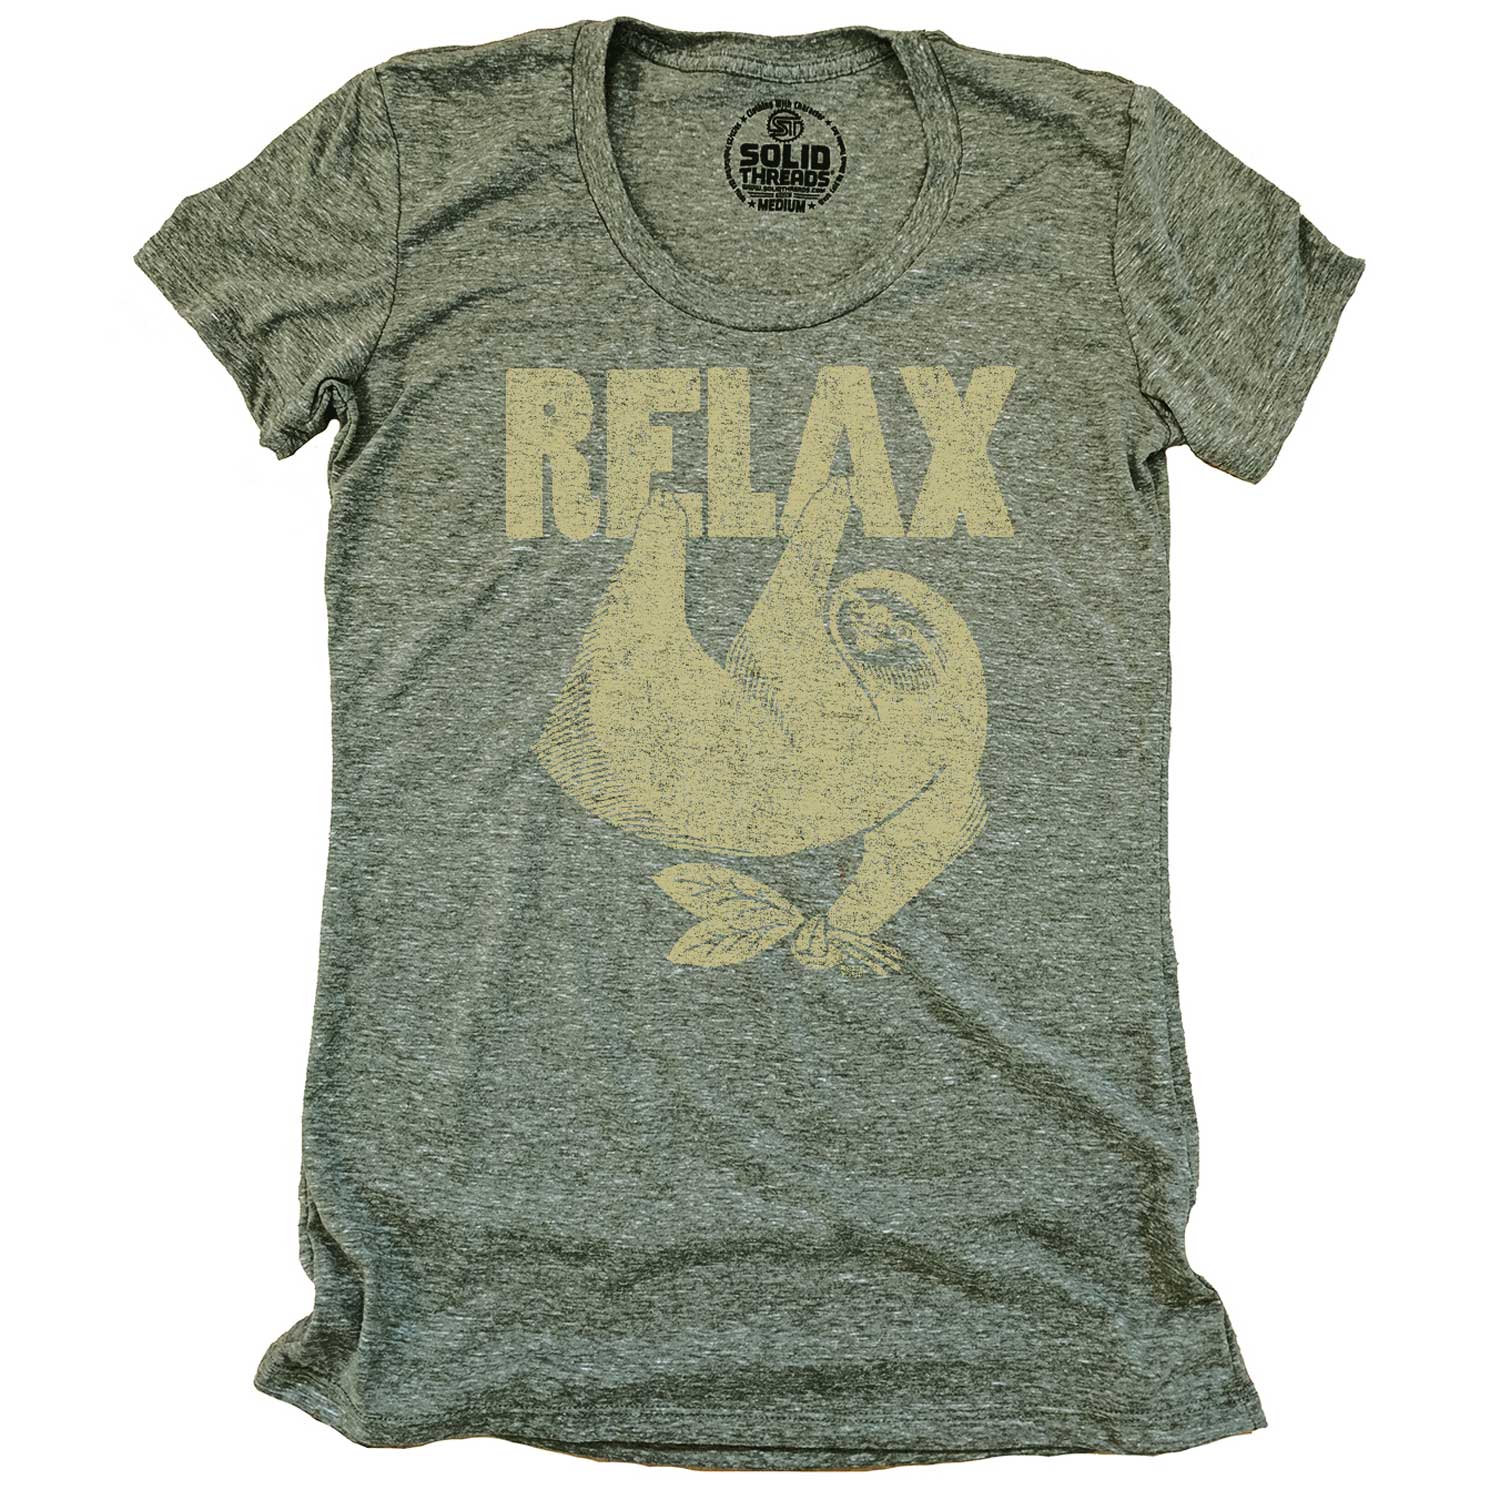 Women's Relax Sloth Vintage Animal Graphic T-Shirt | Funny Mindfulness Soft Tee | Solid Threads